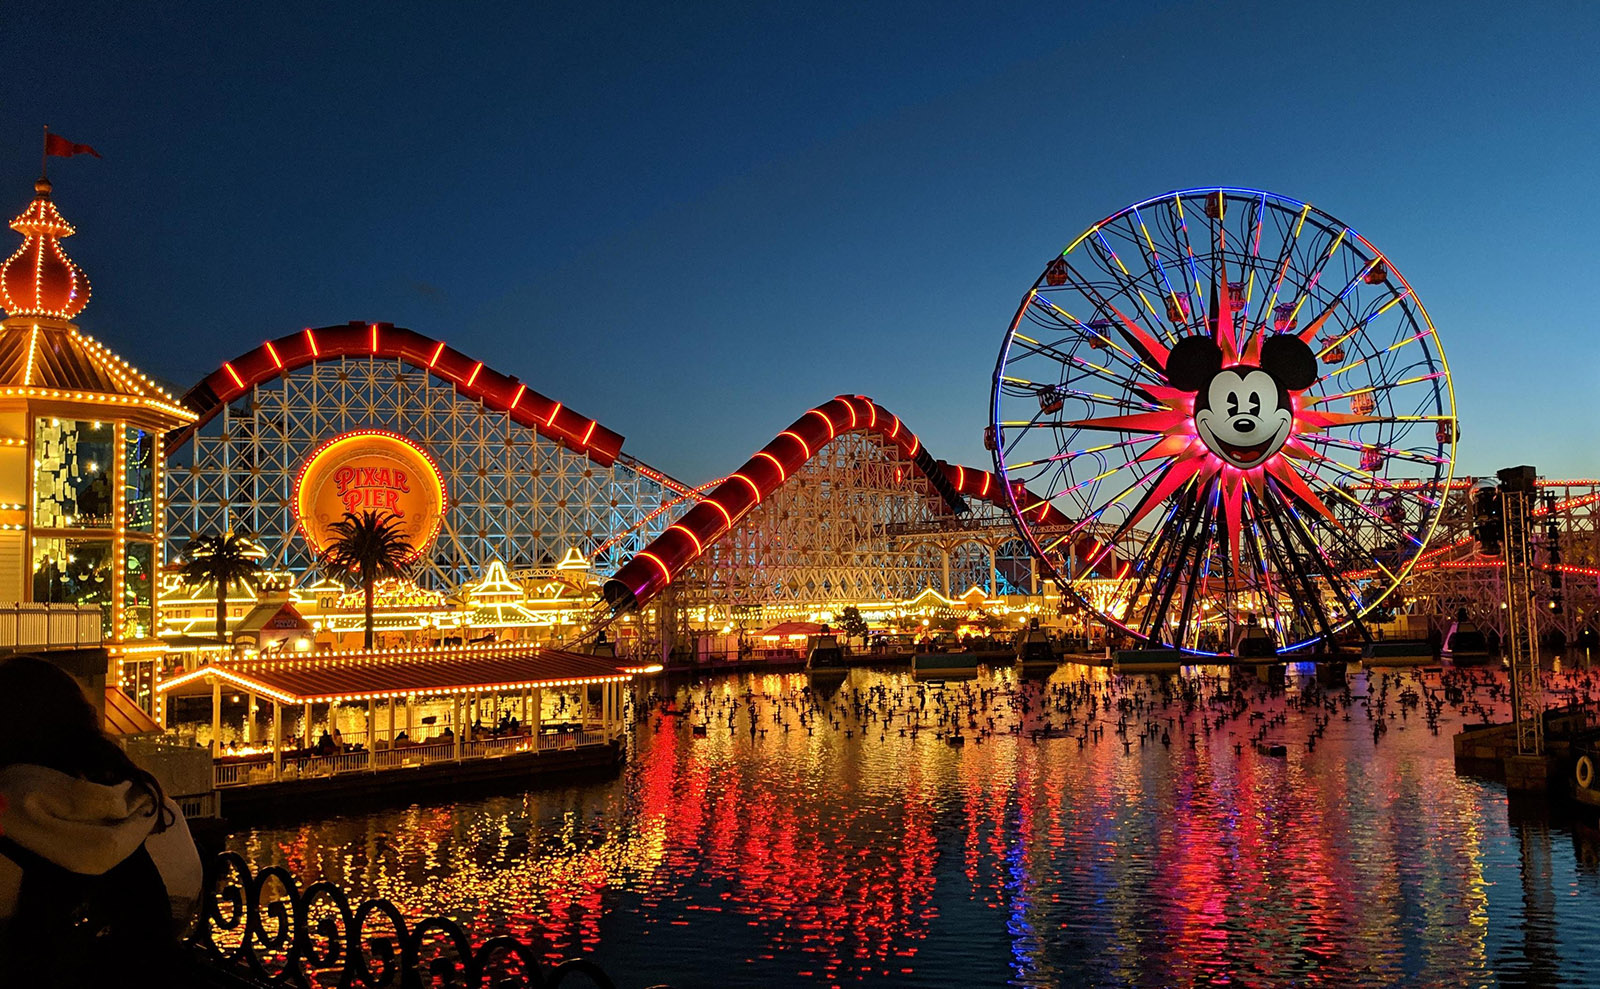  color photo of pixar pier at night with ferris wheel lit up in color showing the face of mickey mouse